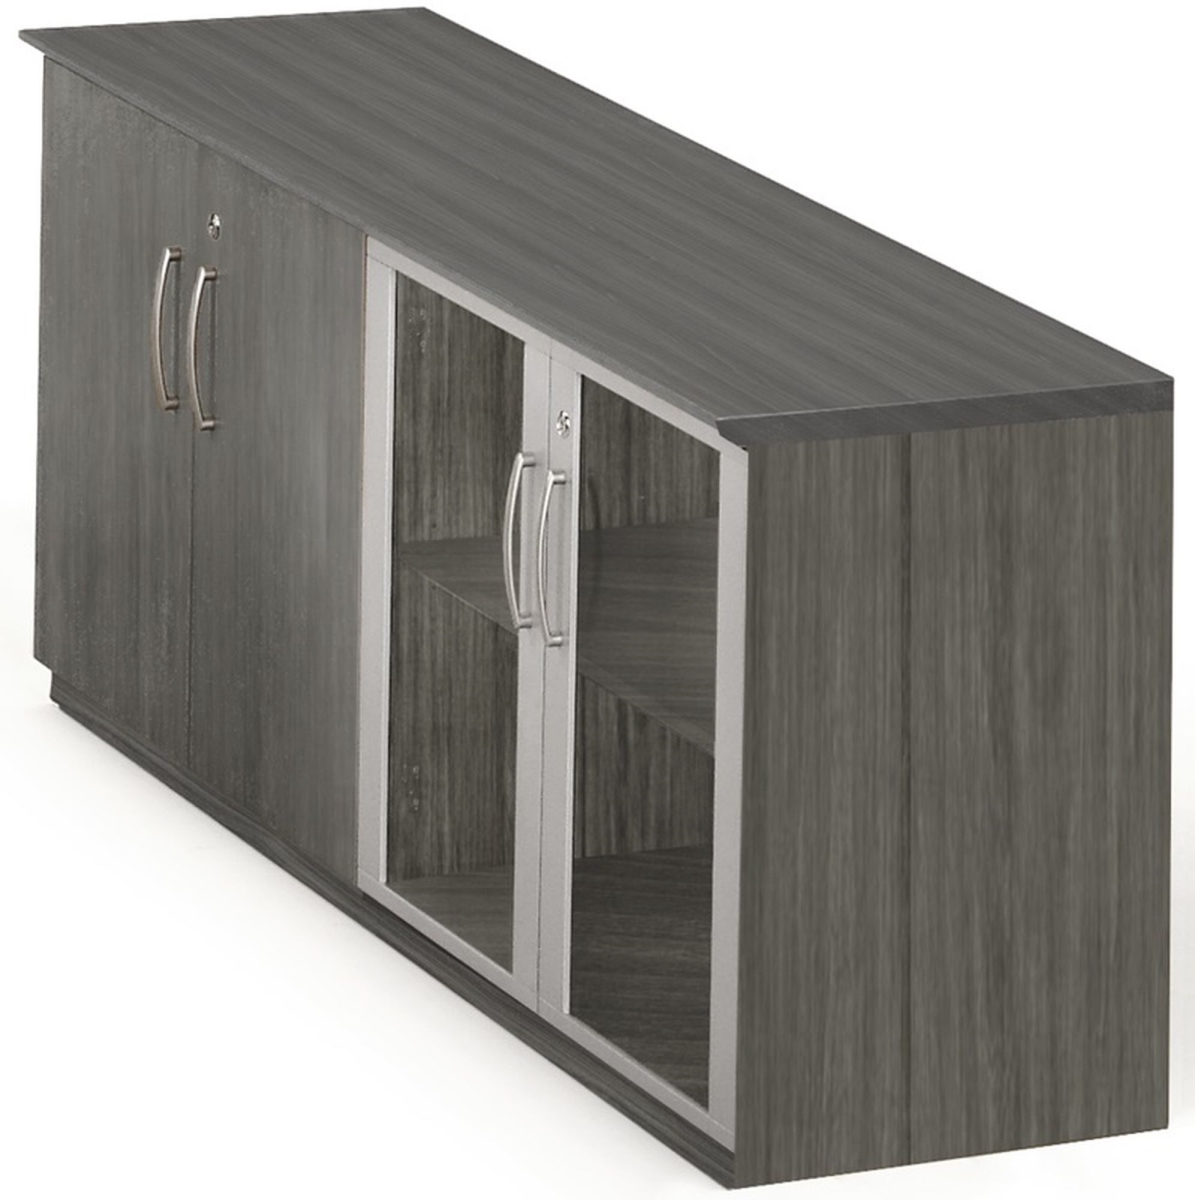 Mvlclgs Medina Low Wall Cabinet With Glass Doors - Gray Steel - 29.5 X 72 X 20 In.